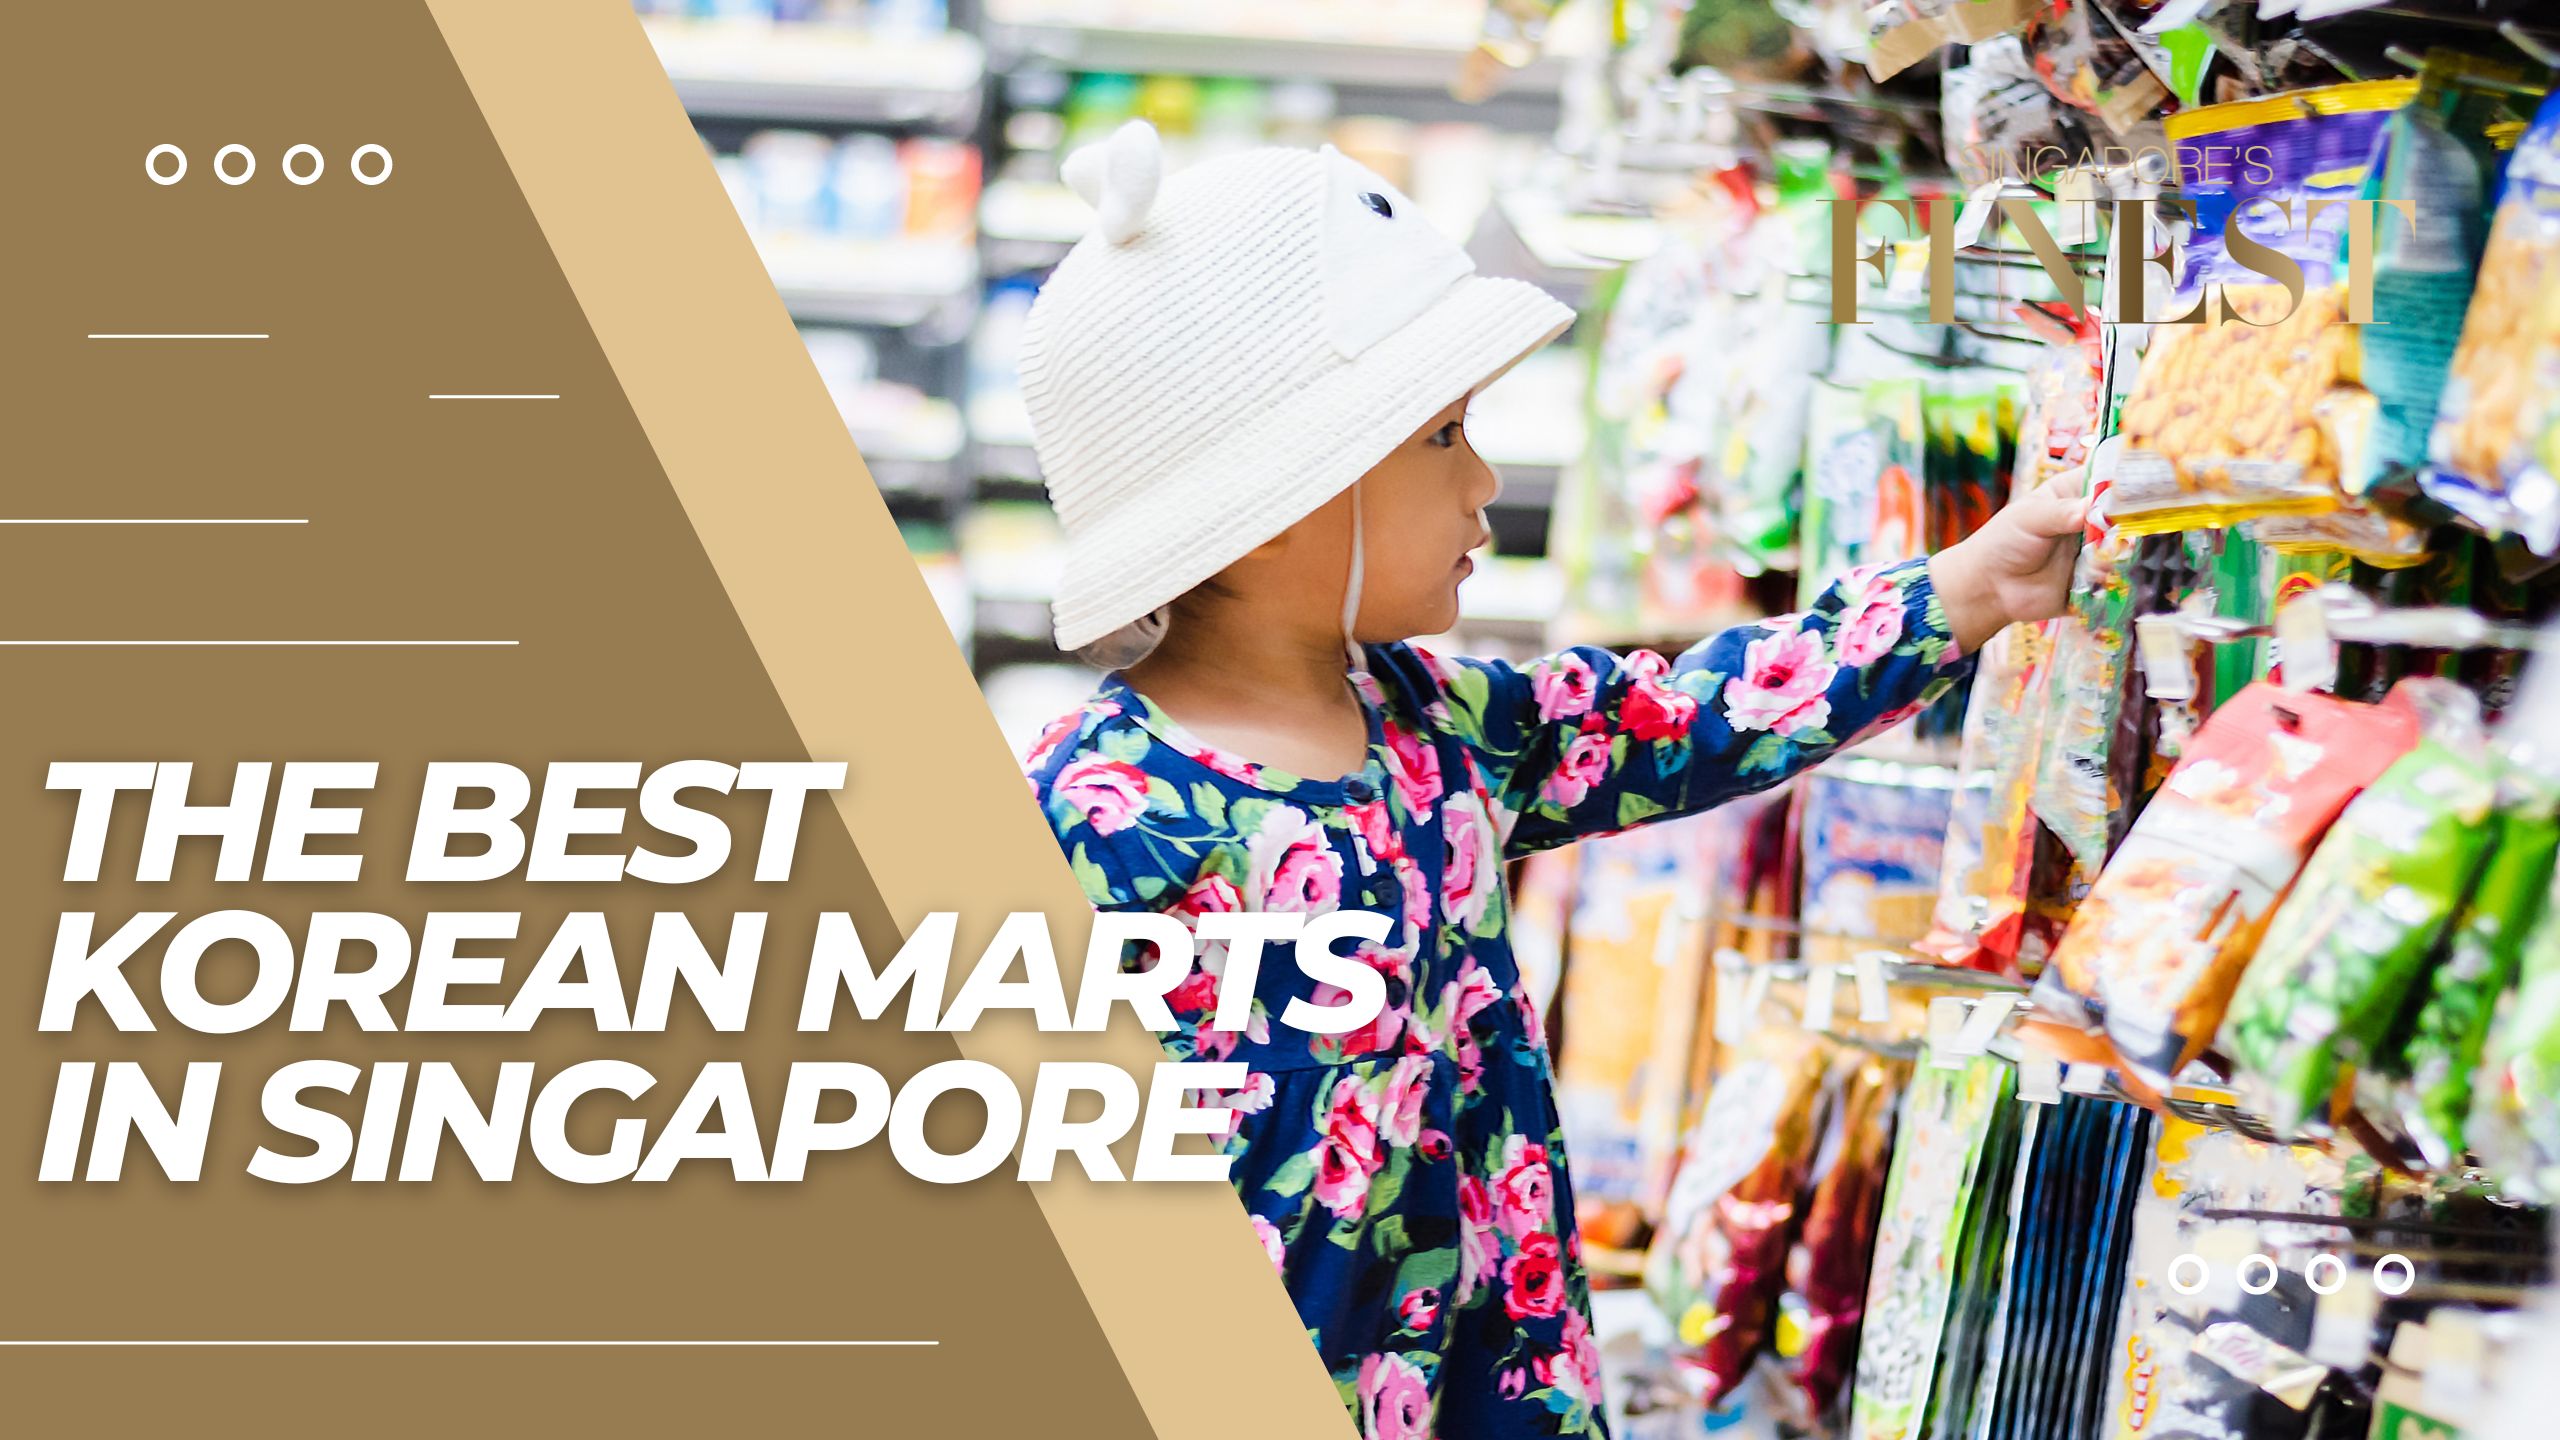 The Finest Korean Marts in Singapore